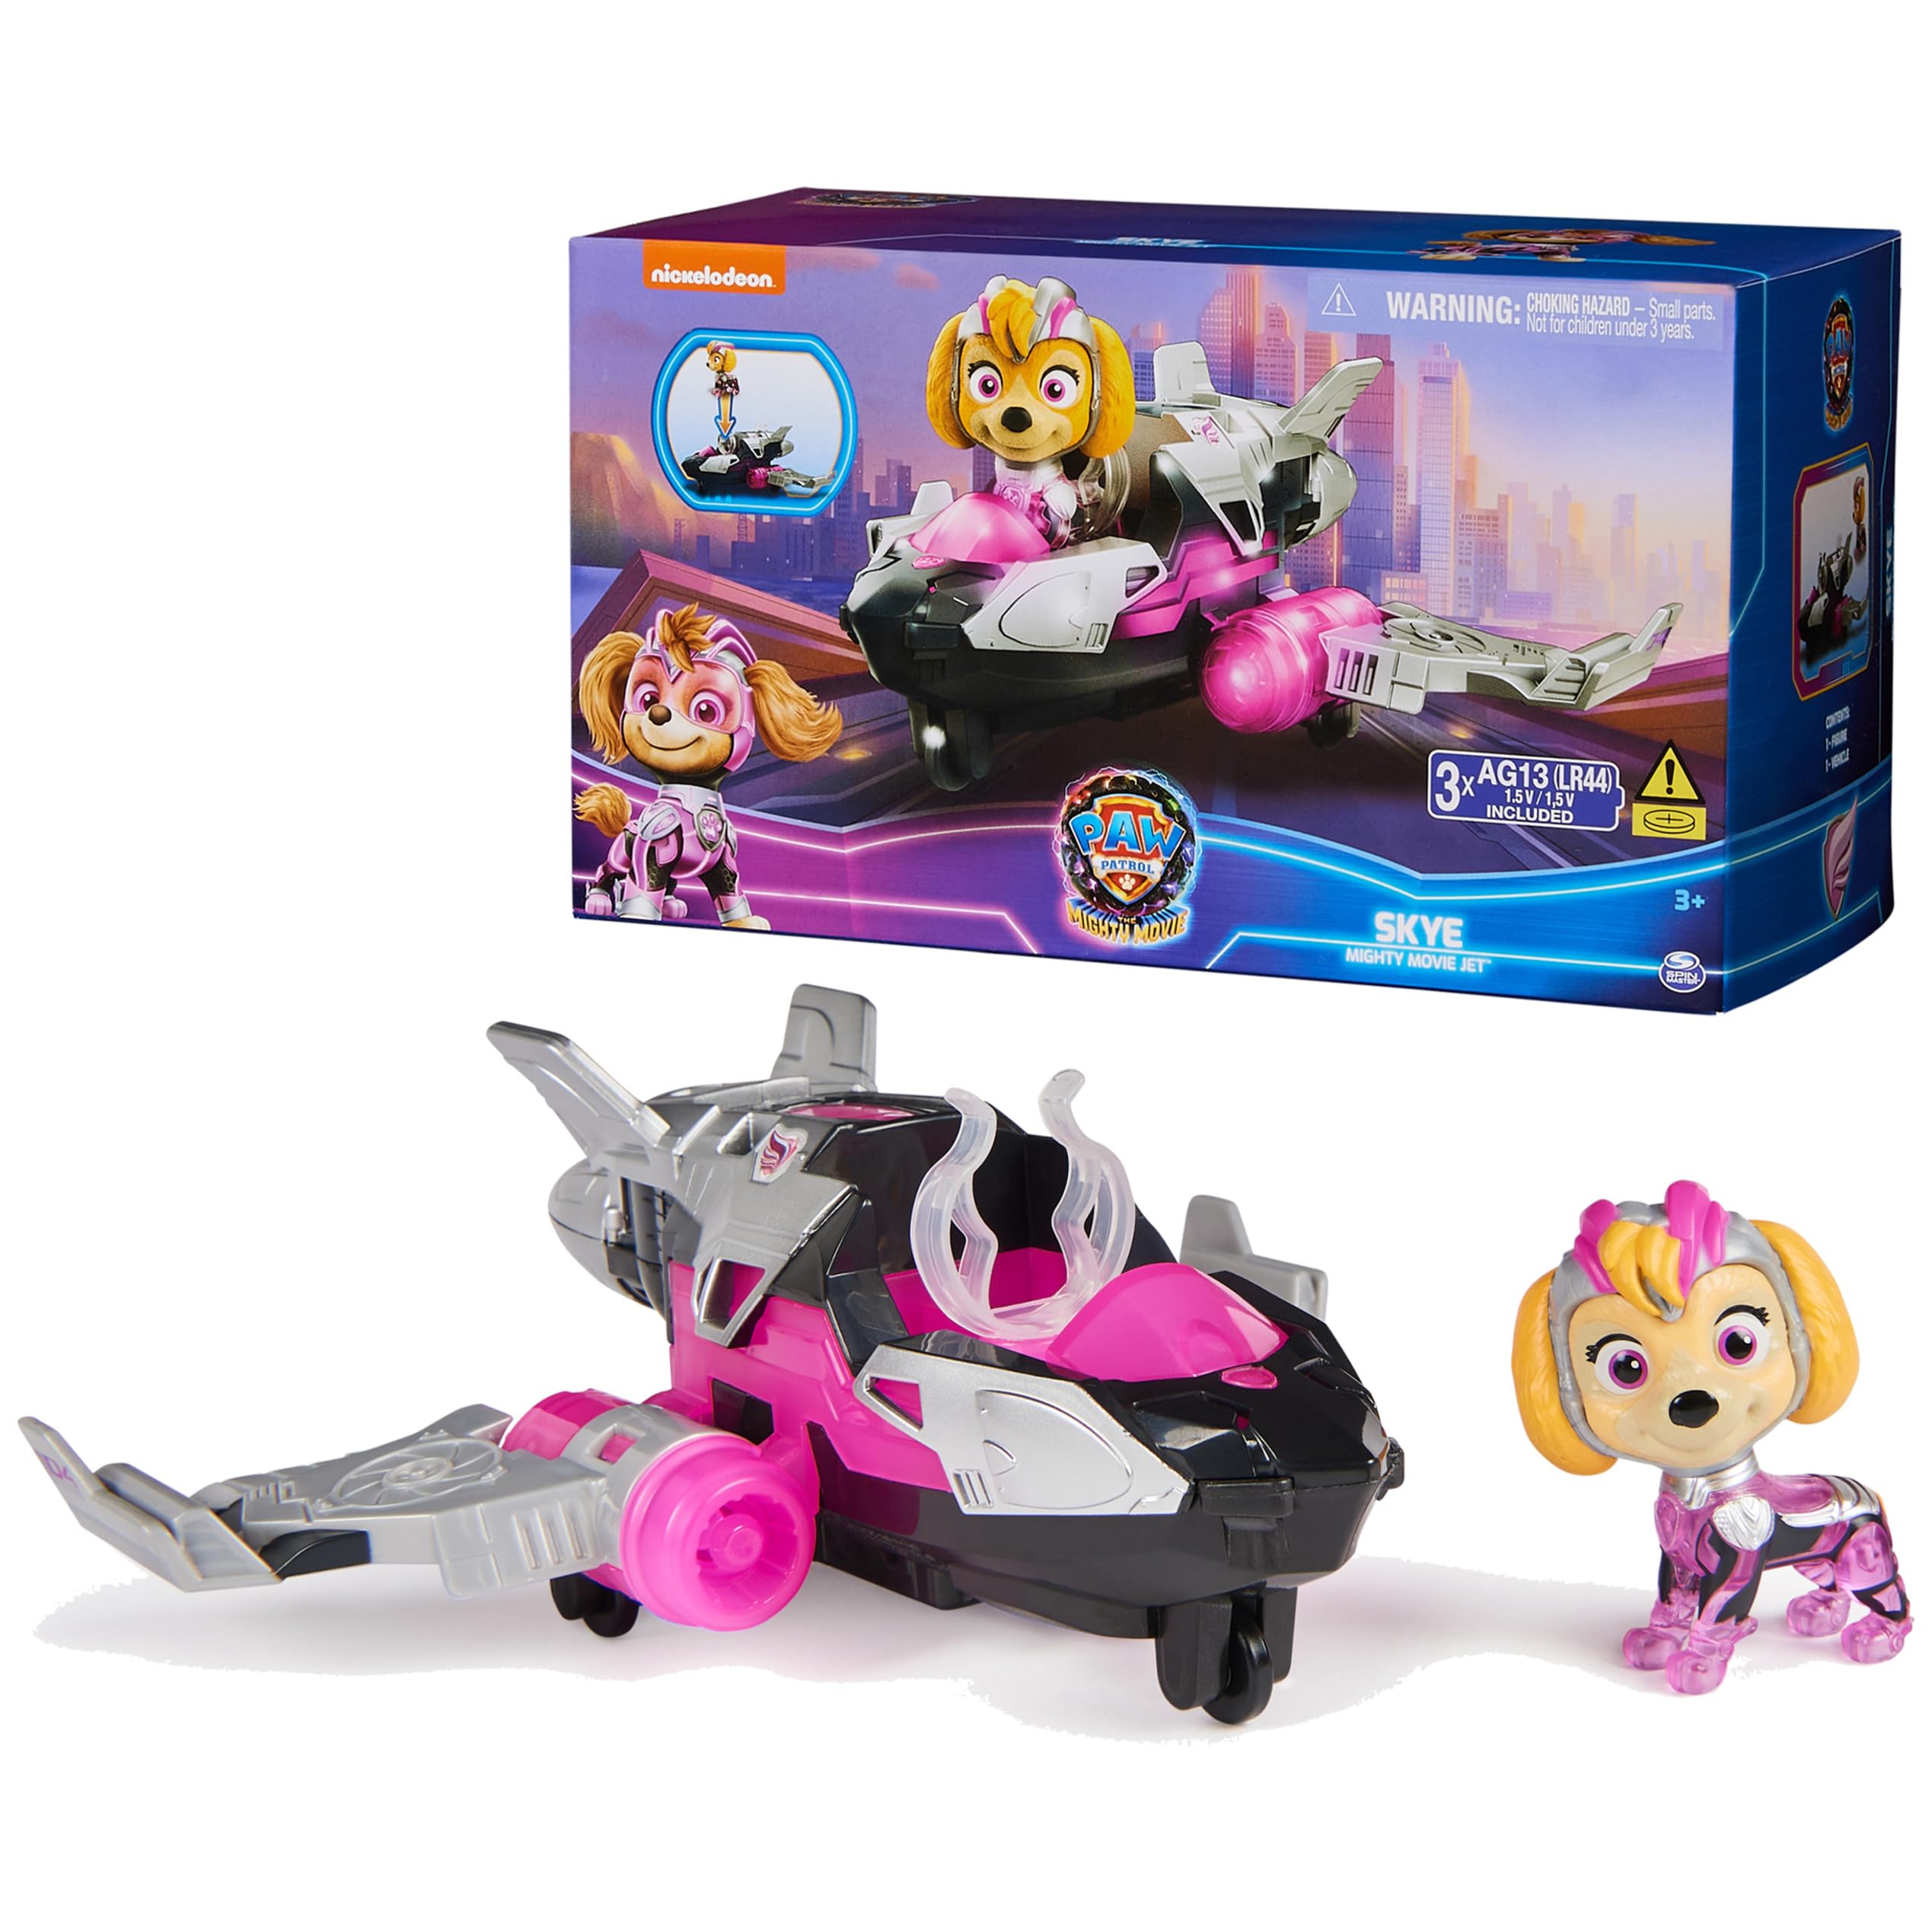 $11.99: Paw Patrol: The Mighty Movie, Airplane Toy with Skye Mighty Pups Action Figure